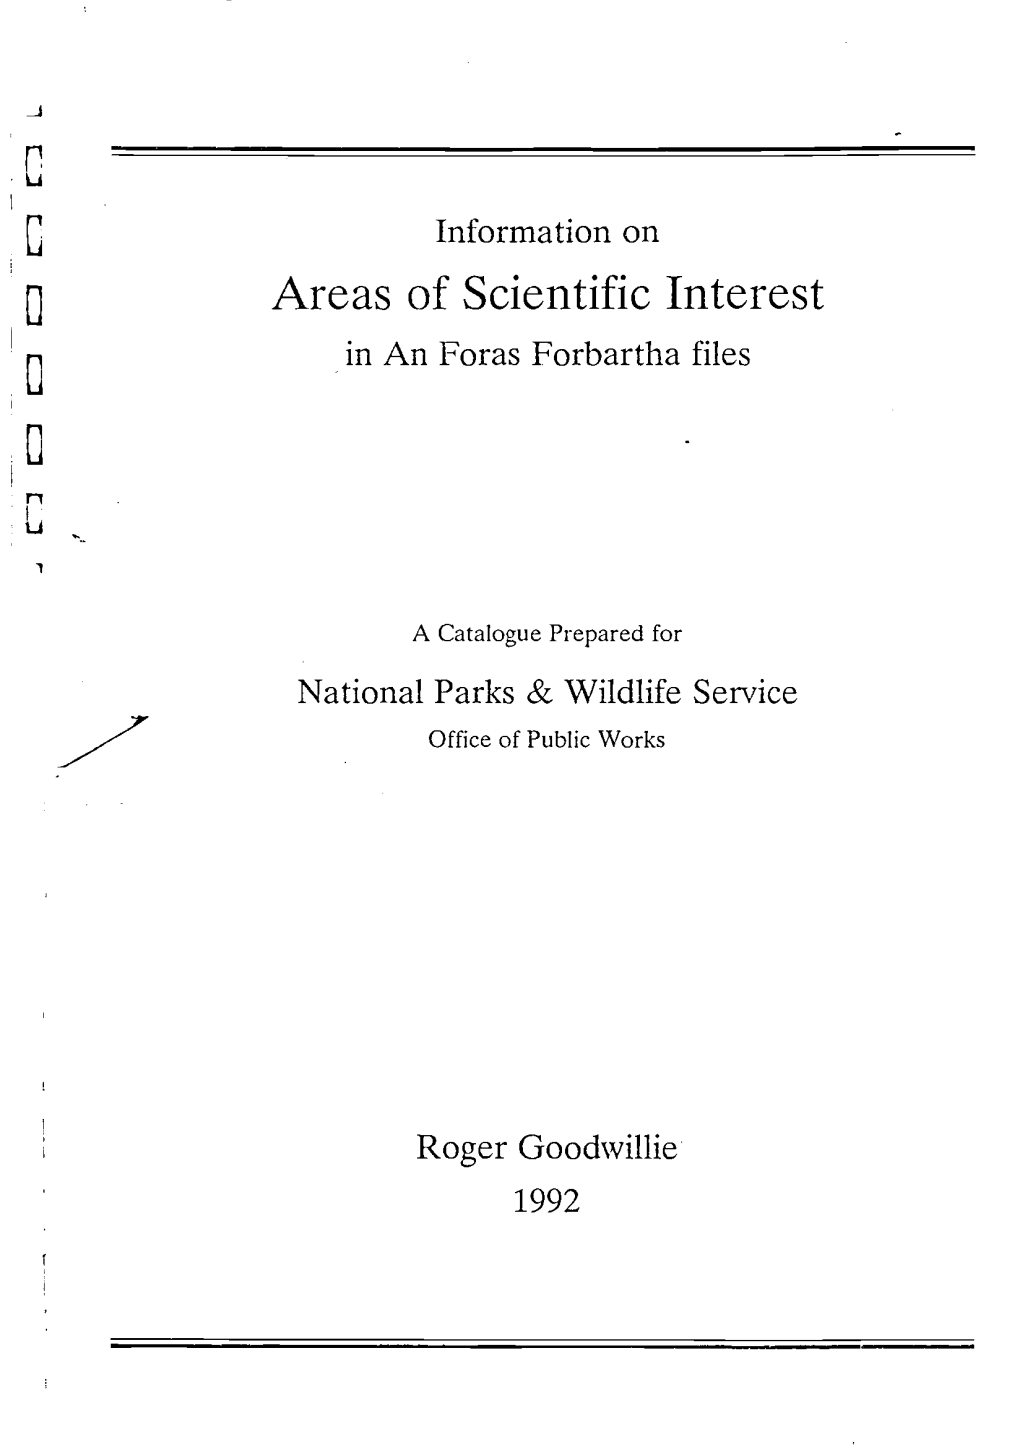 Information on Areas of Scientific Interest in an Foras Forbartha Files